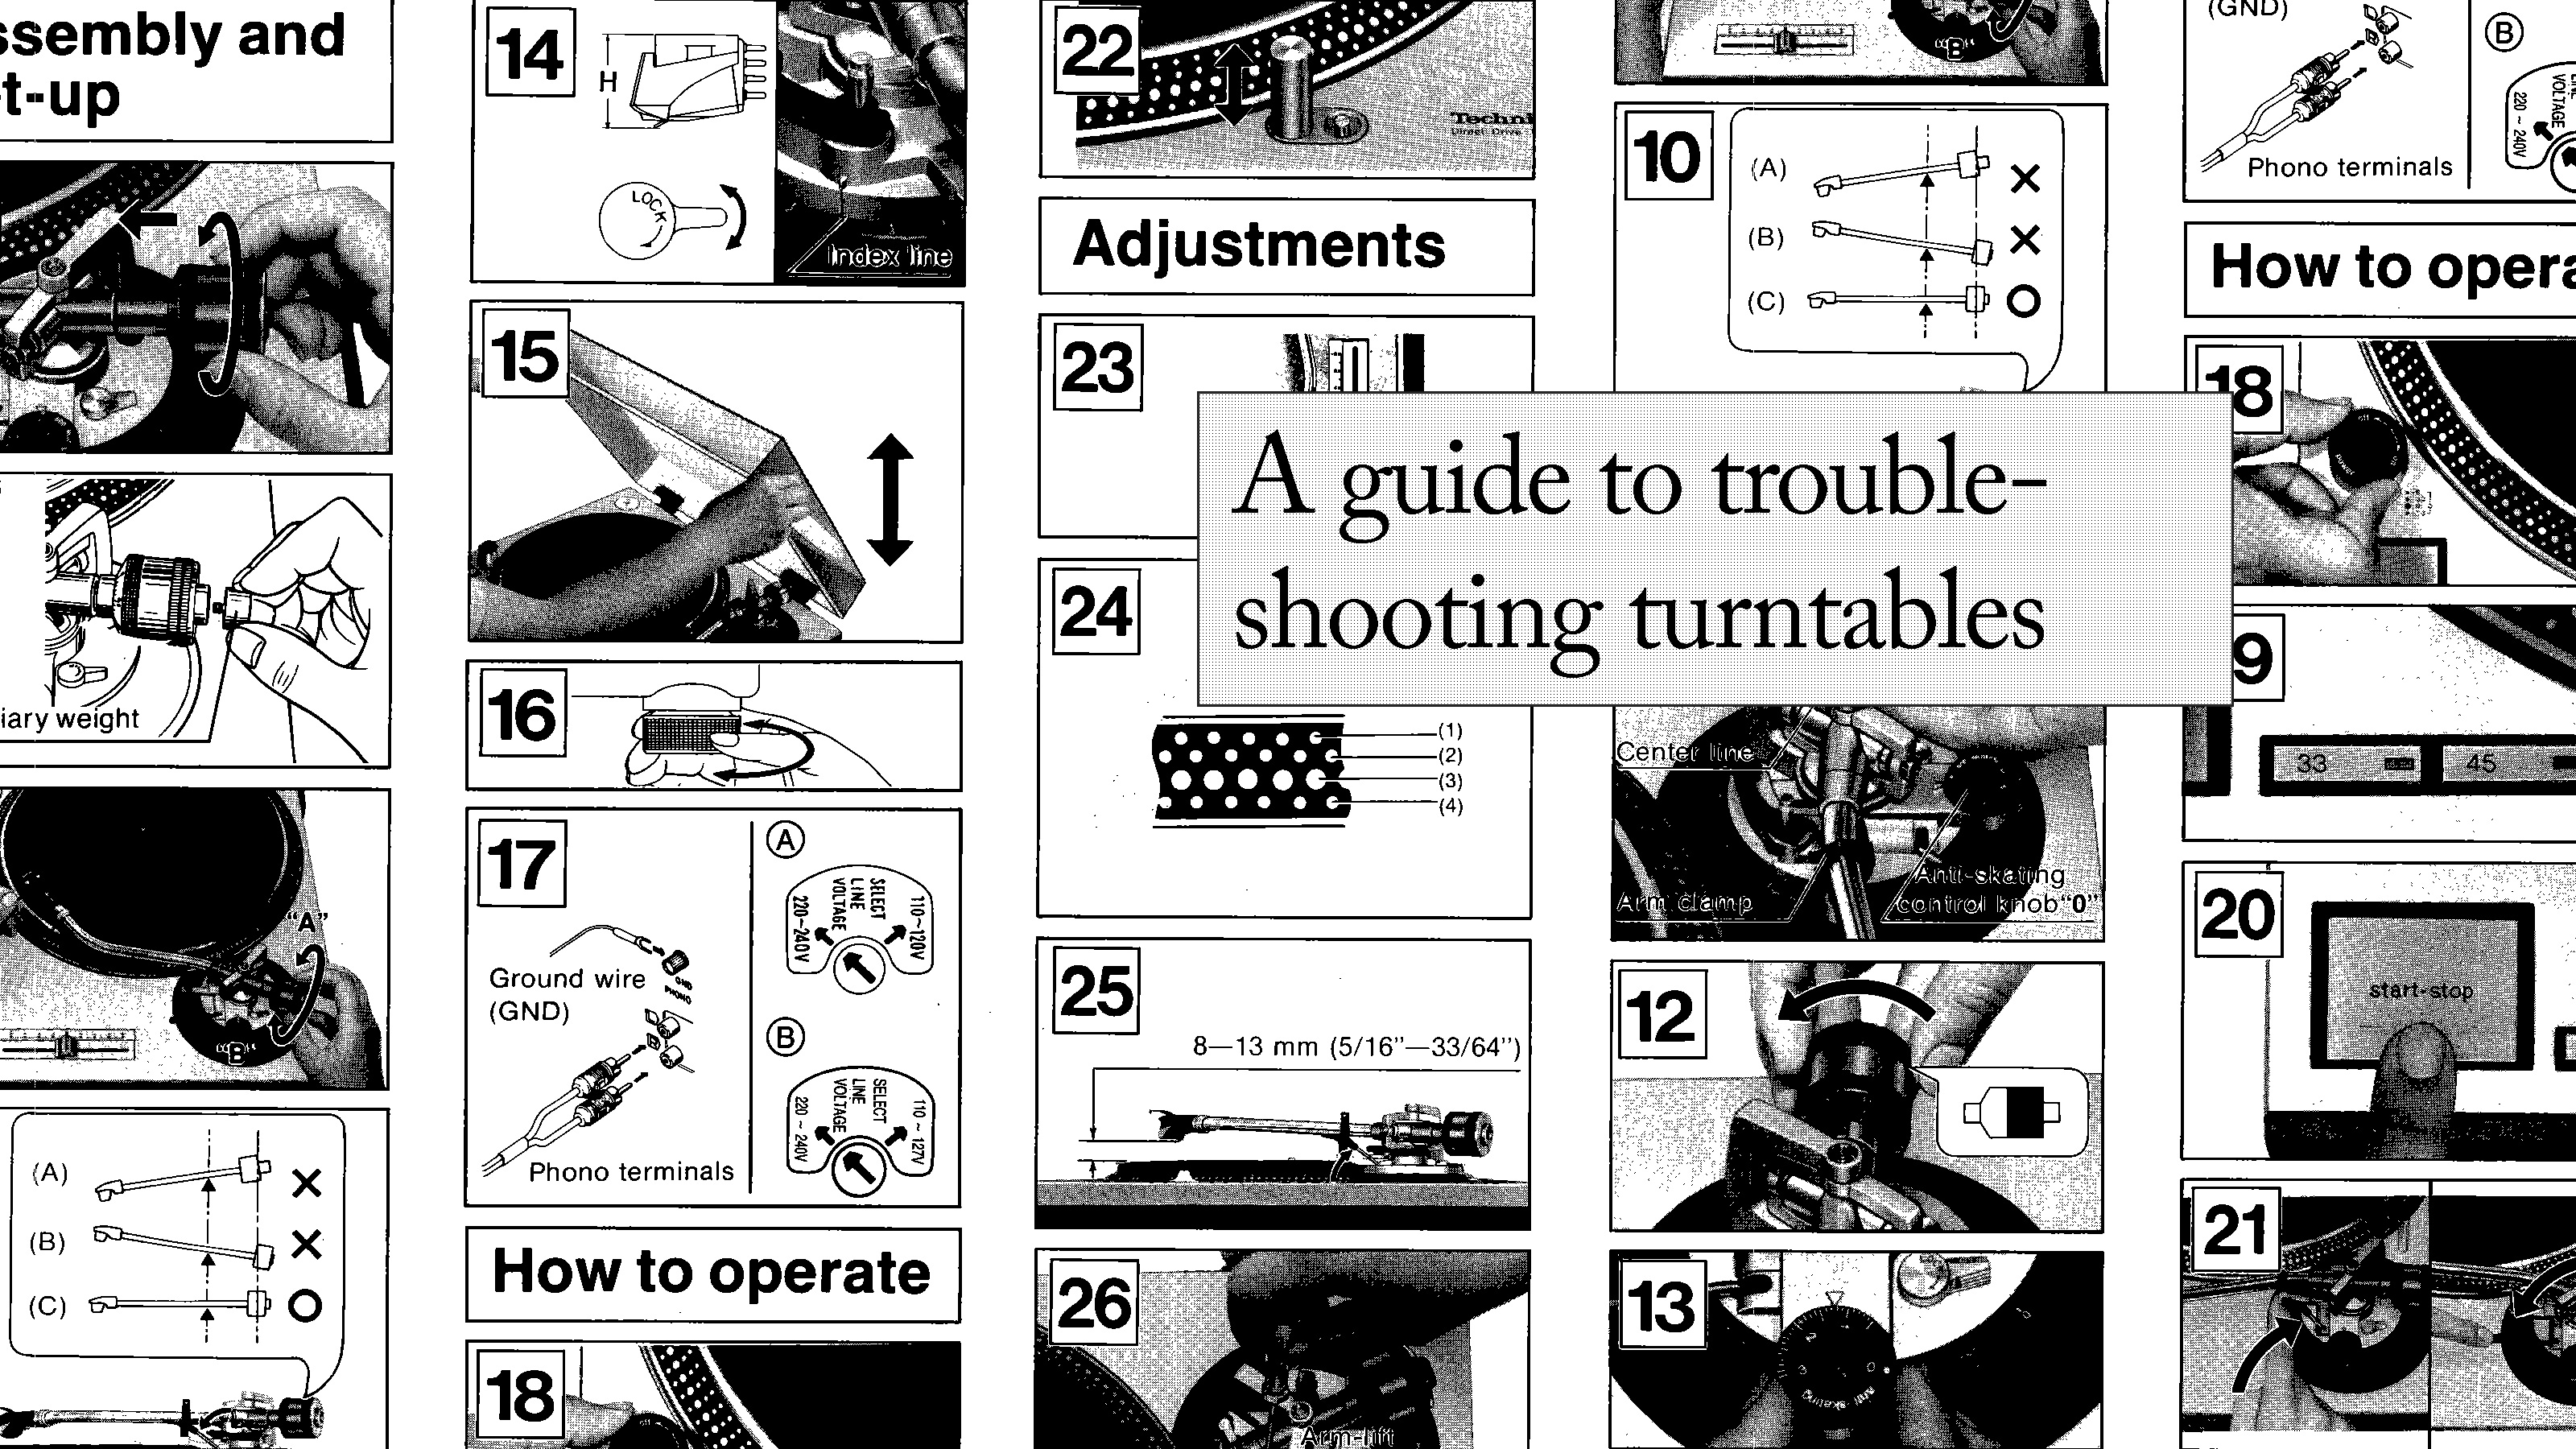 A guide to troubleshooting turntables 